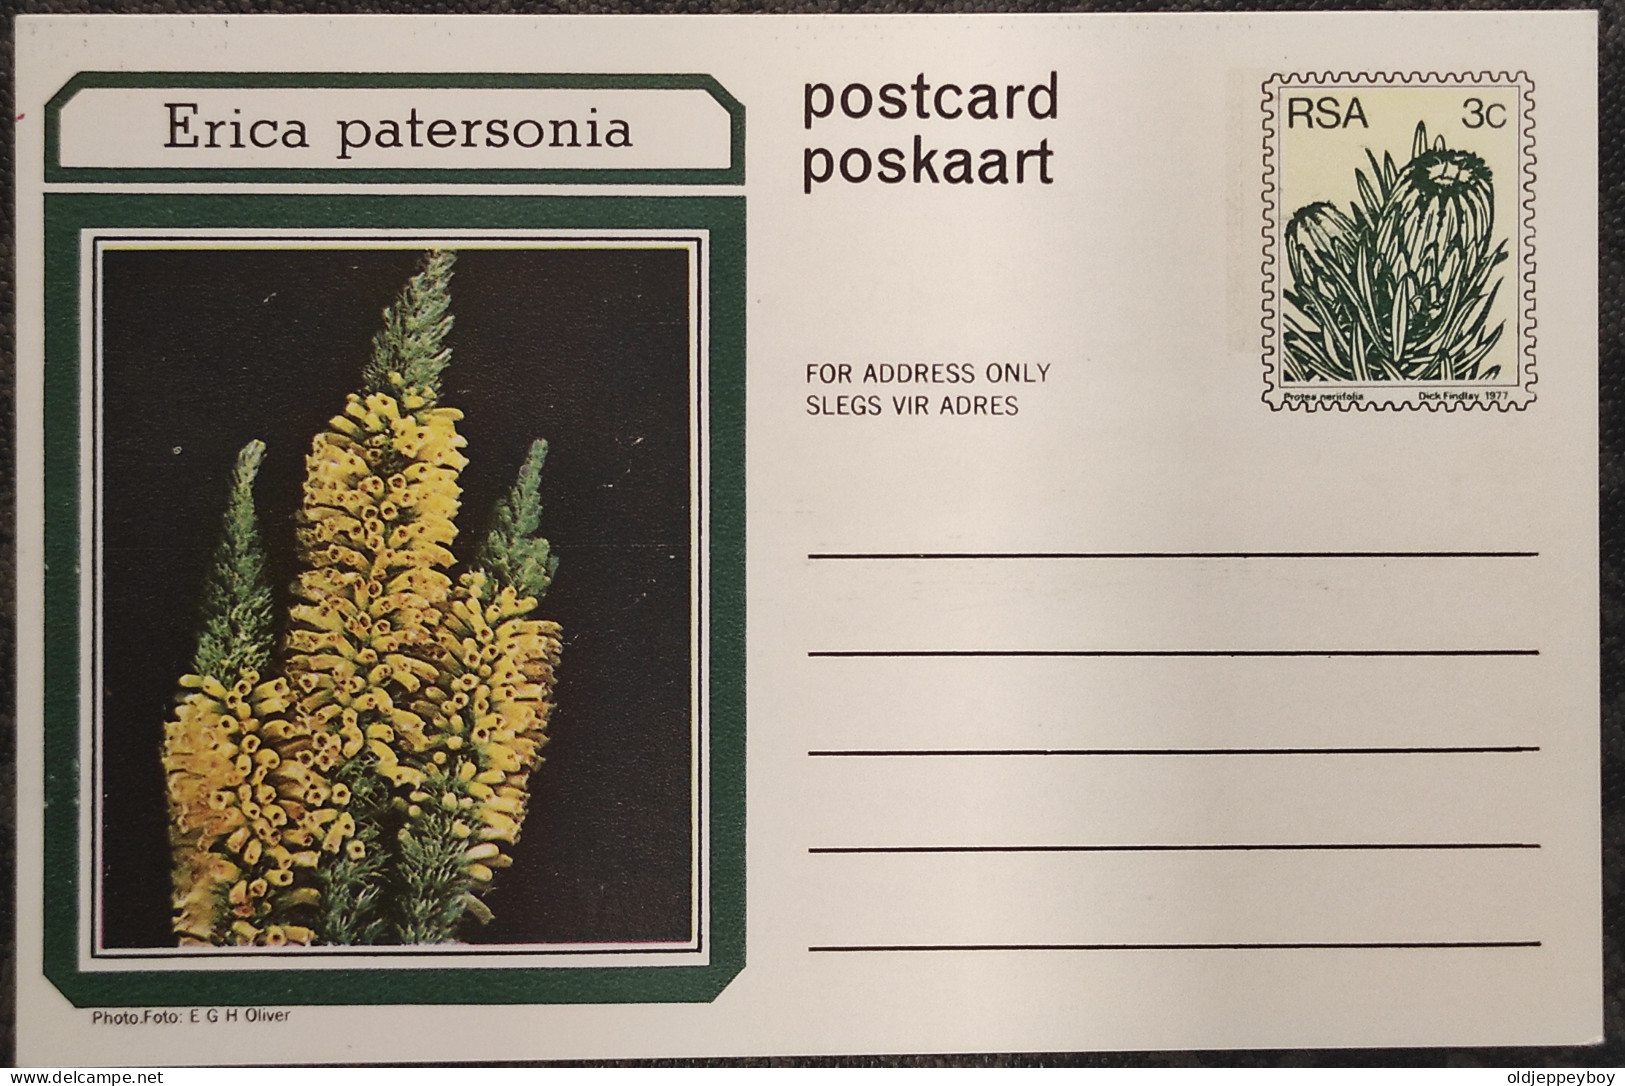 3c SOUTH AFRICA Postal STATIONERY CARD Illus ERICA PATERSONIA FLOWER Cover Stamps Flowers Rsa - Storia Postale